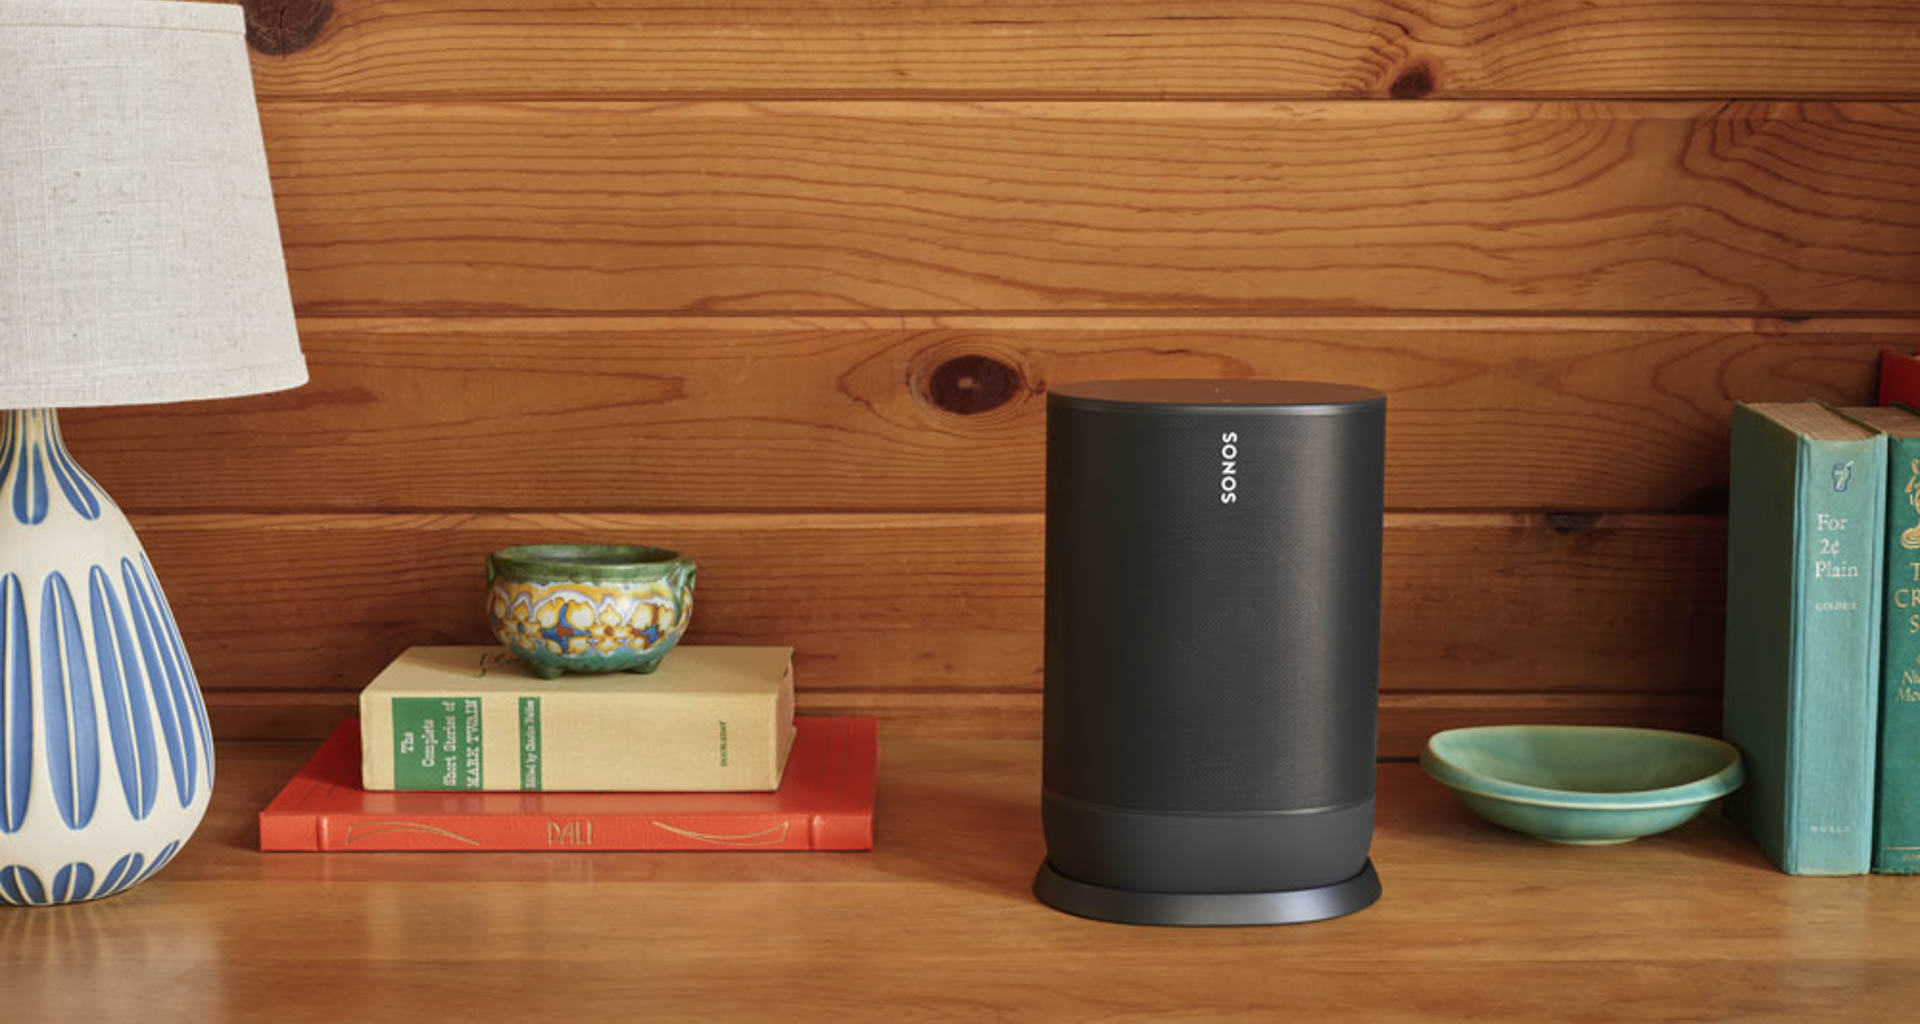 Don't expect your smart tech devices, like smart speakers, to be covered by a home warranty. Image: Sonos.